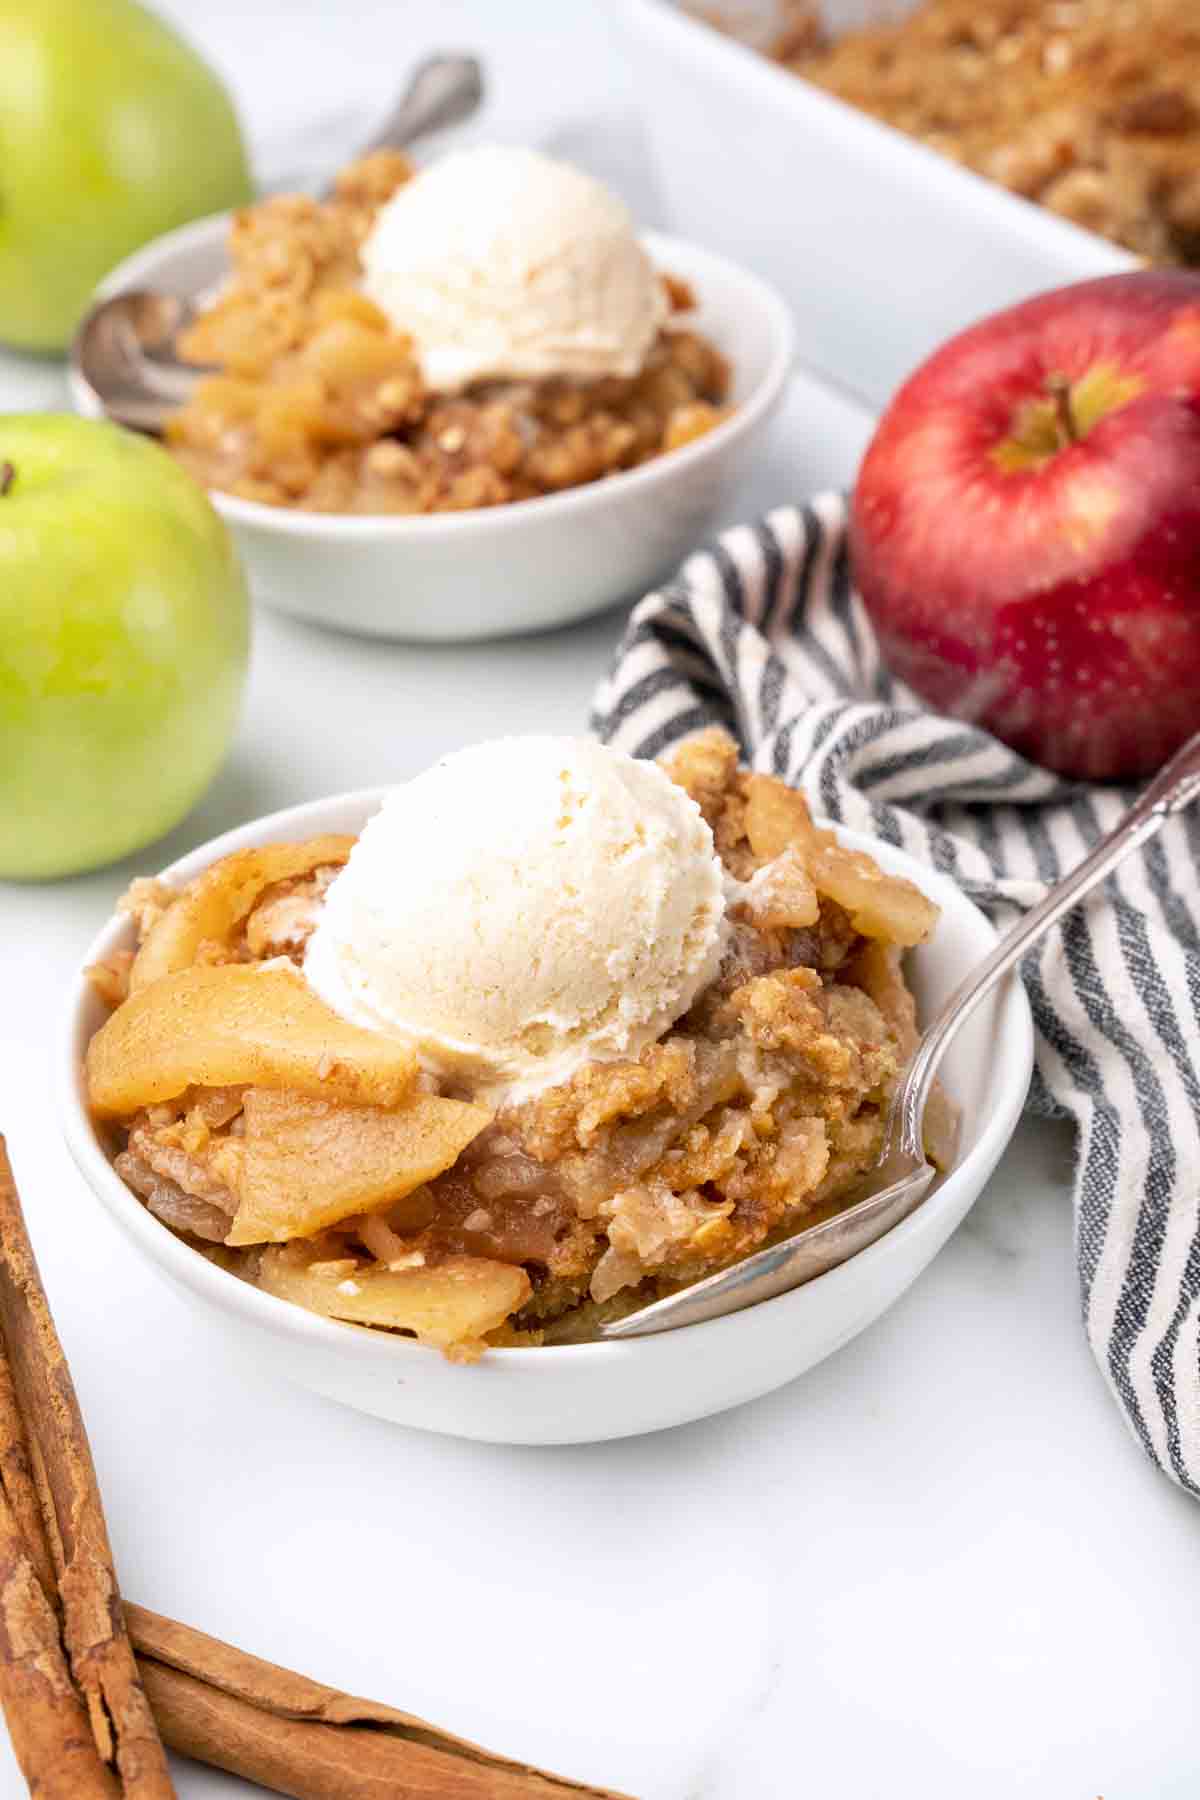 white bowl of apple crisp with ice cream next to whole red and green apples